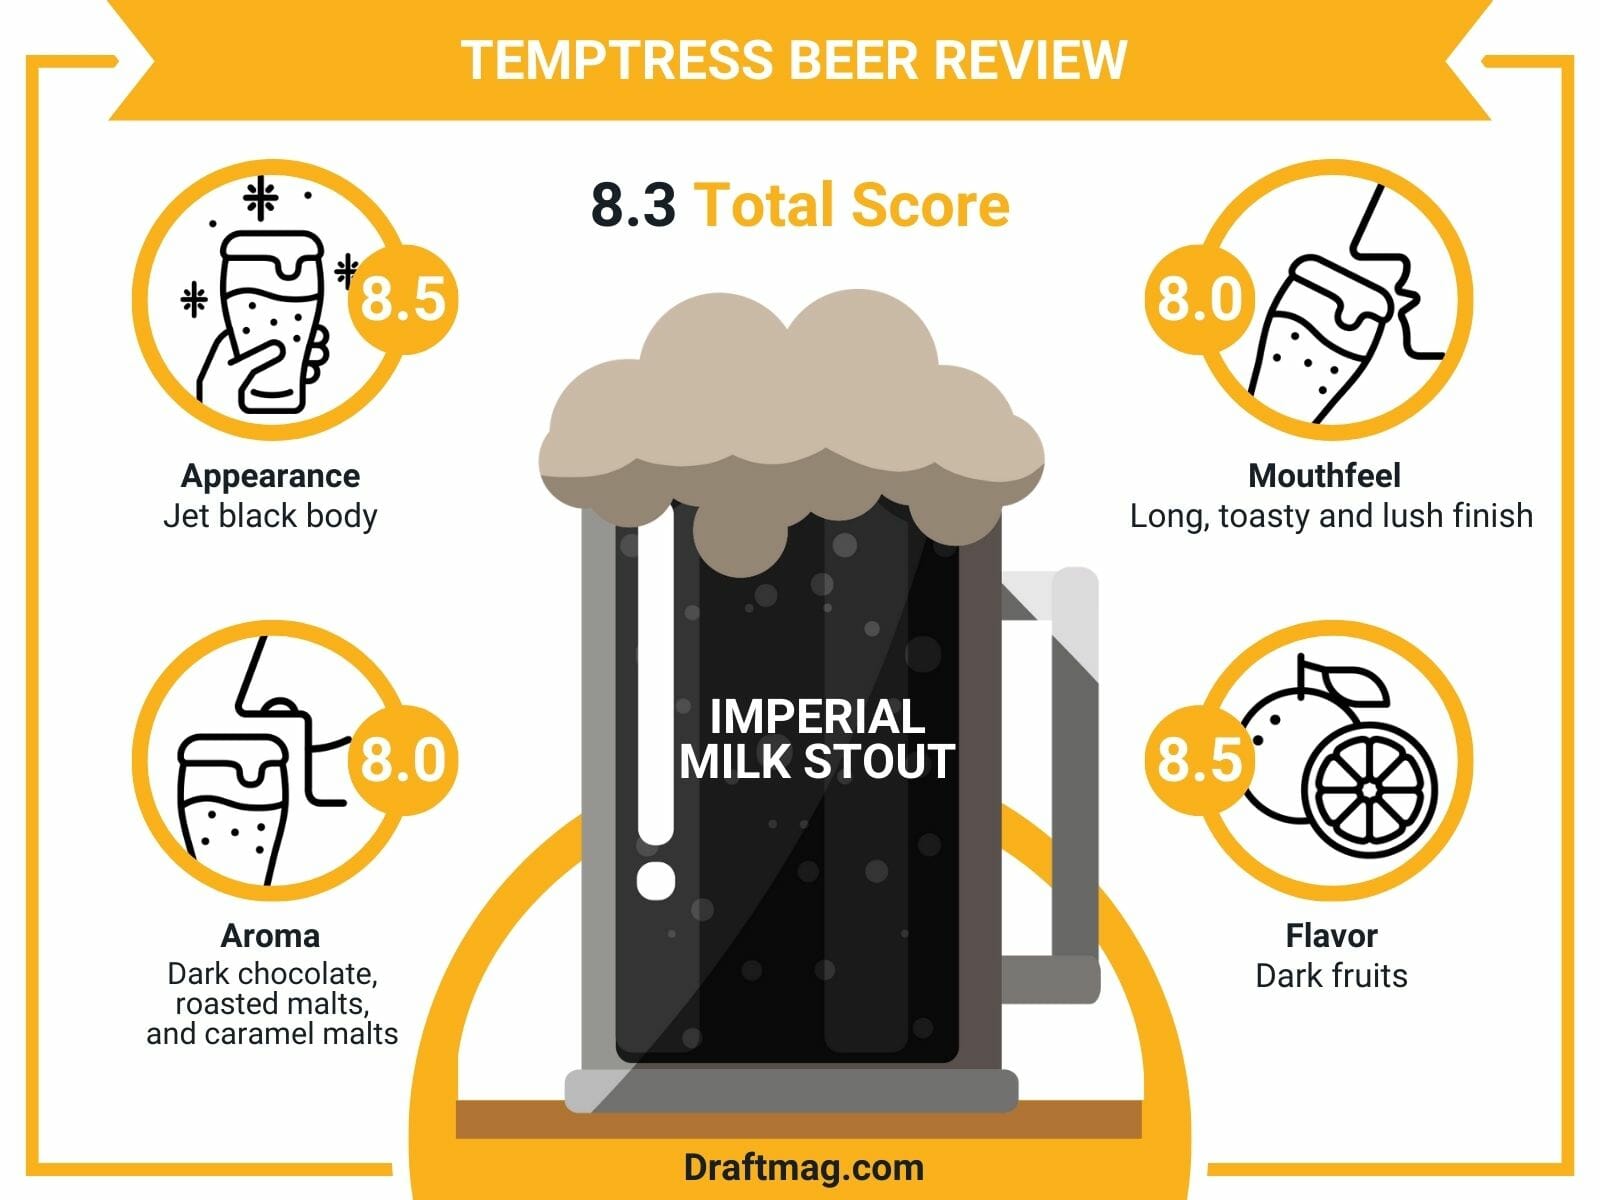 Temptress Beer Review Infographic